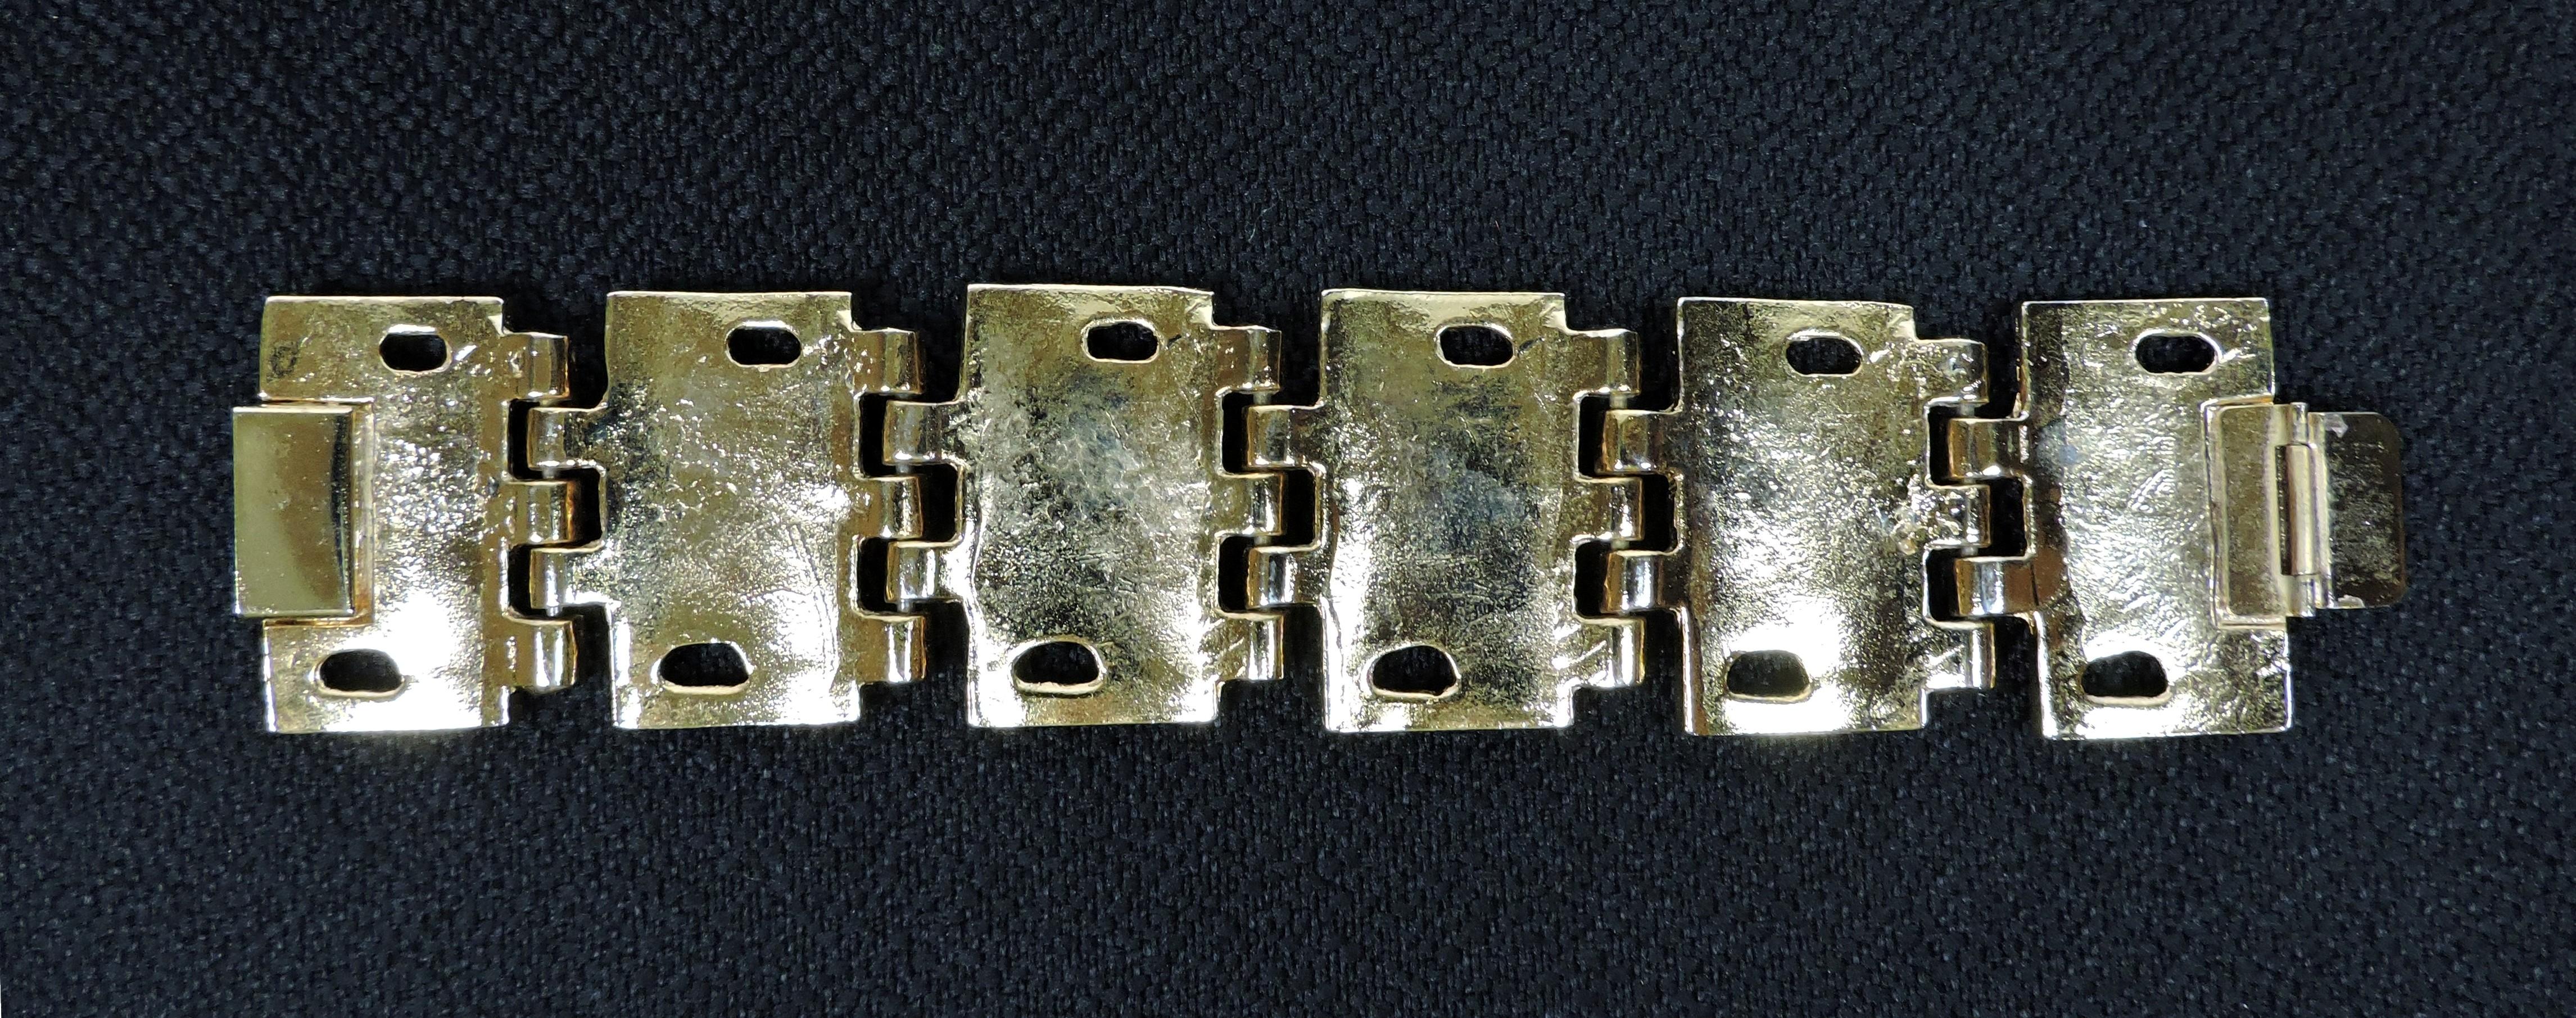 Robert Larin Brutalist Modernist Sculptural Bracelet, Canadian Art Jewelry In Good Condition For Sale In Chesterfield, NJ